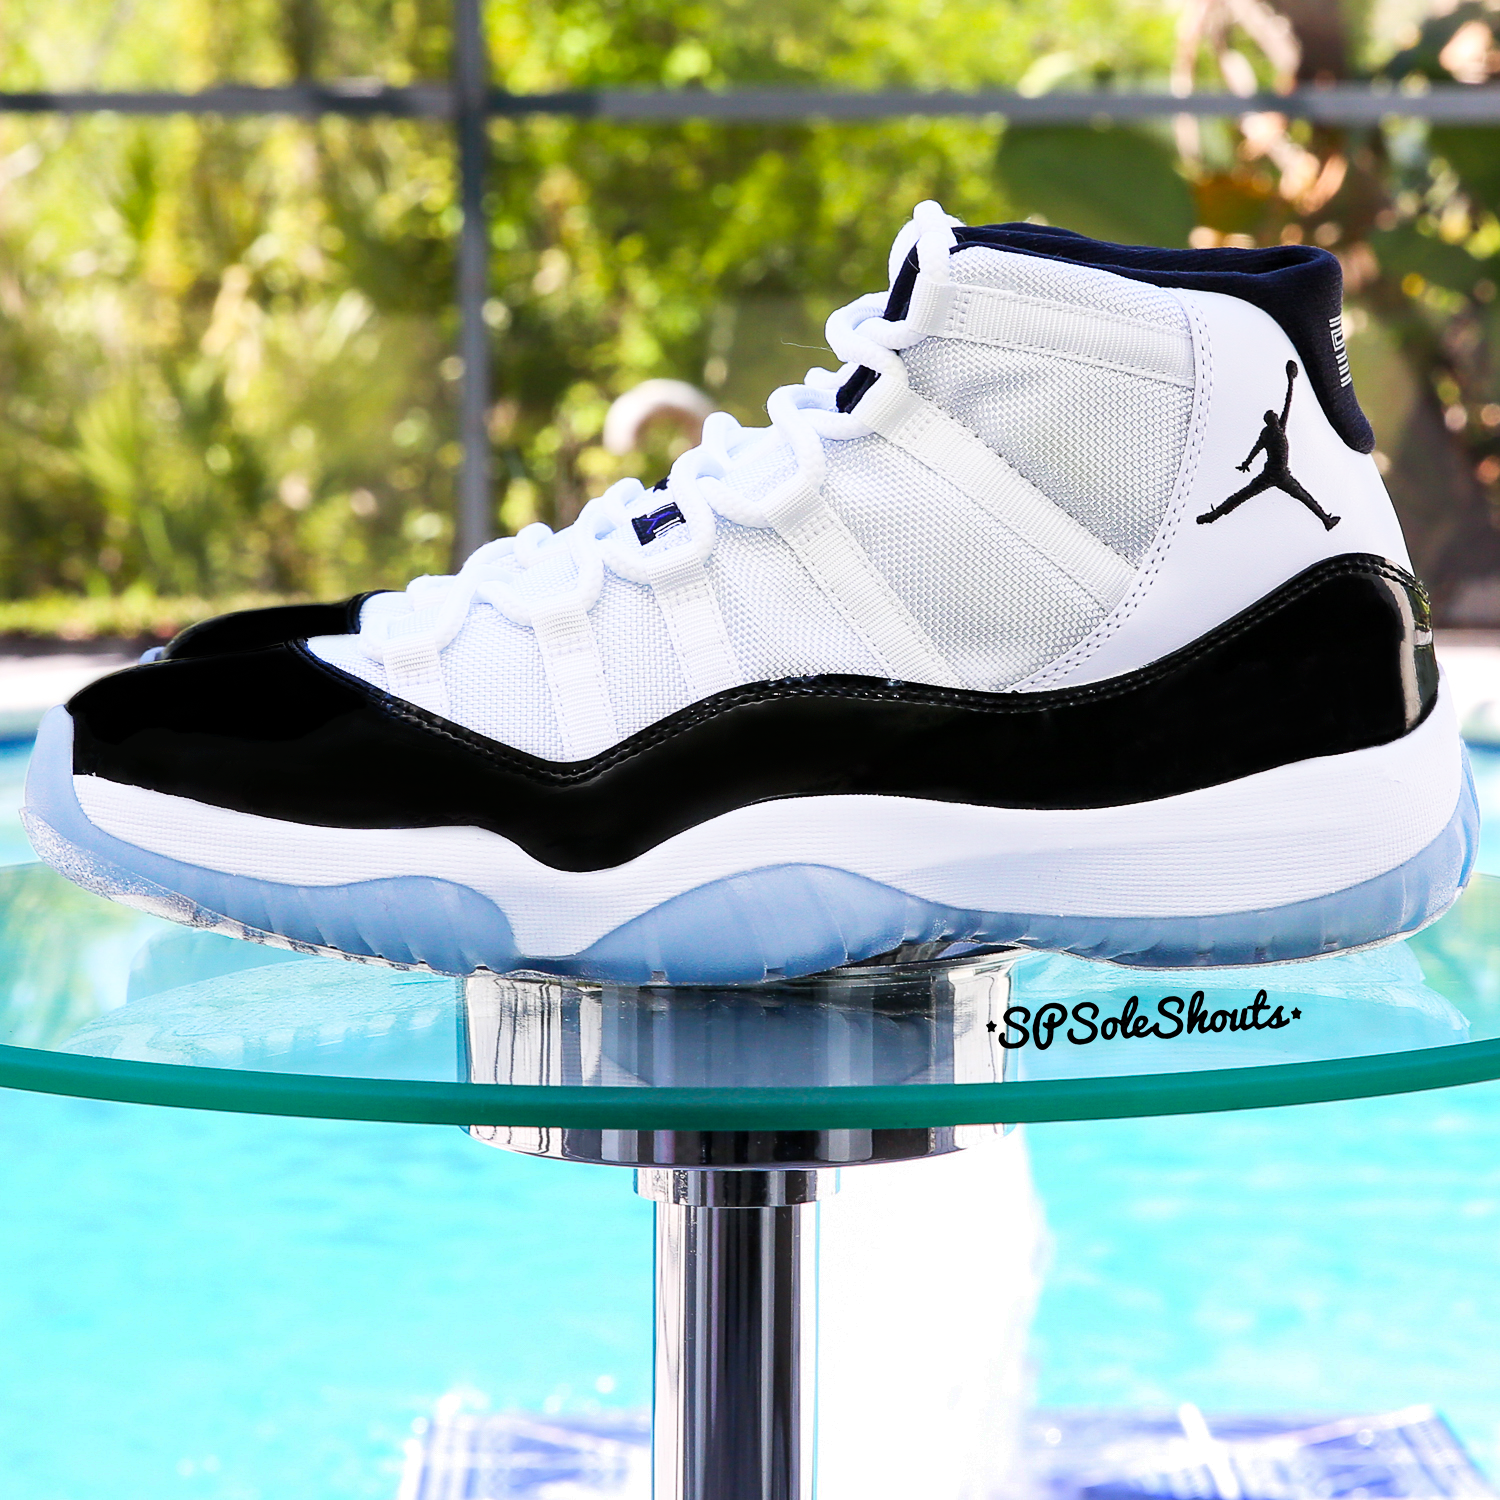 concord 11 over the years